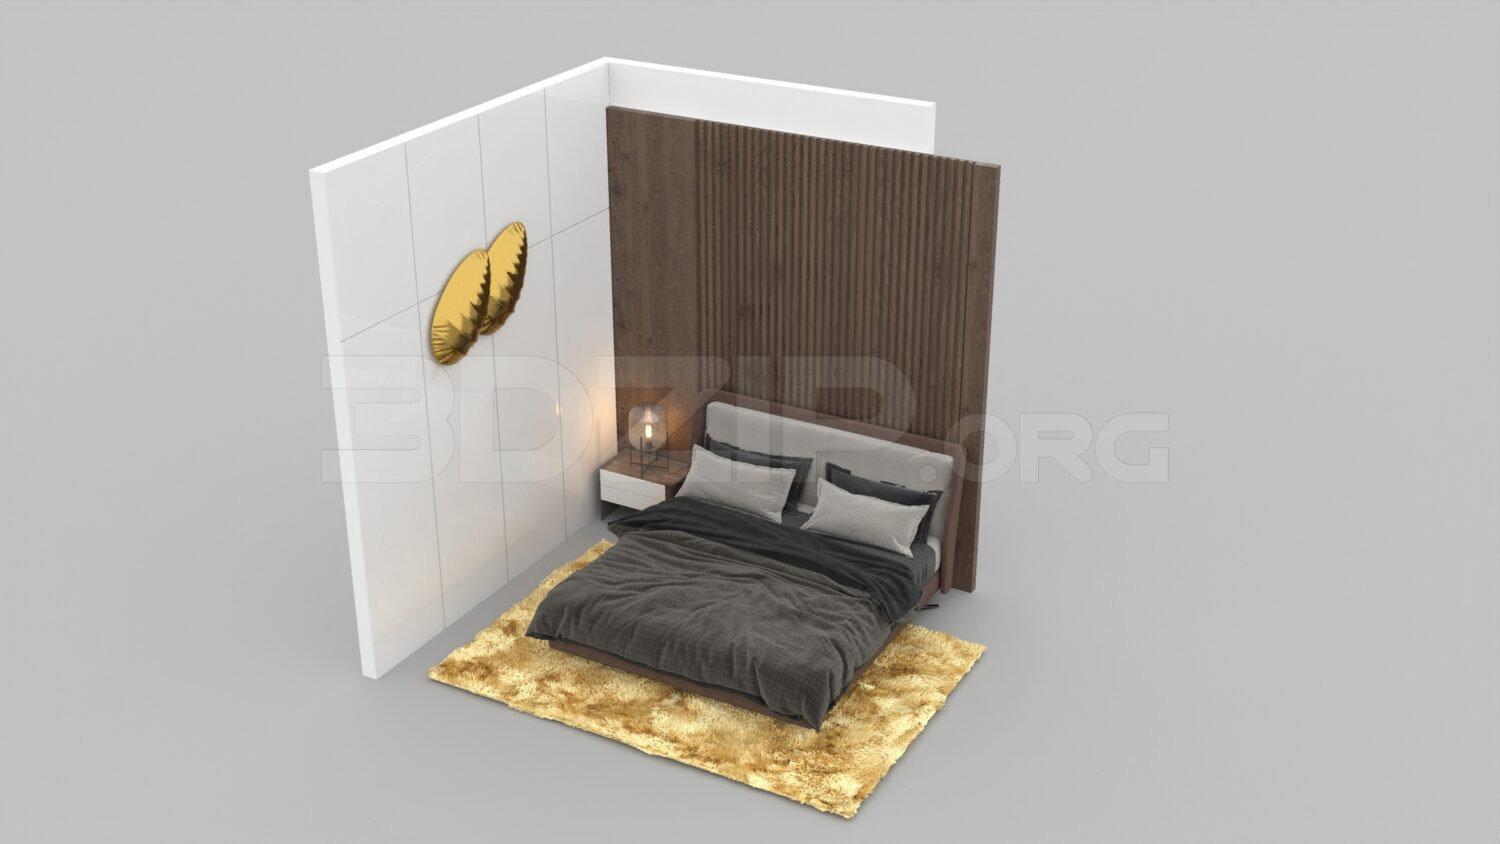 1161. Download Free Bed Model By Ho Quoc Tuan